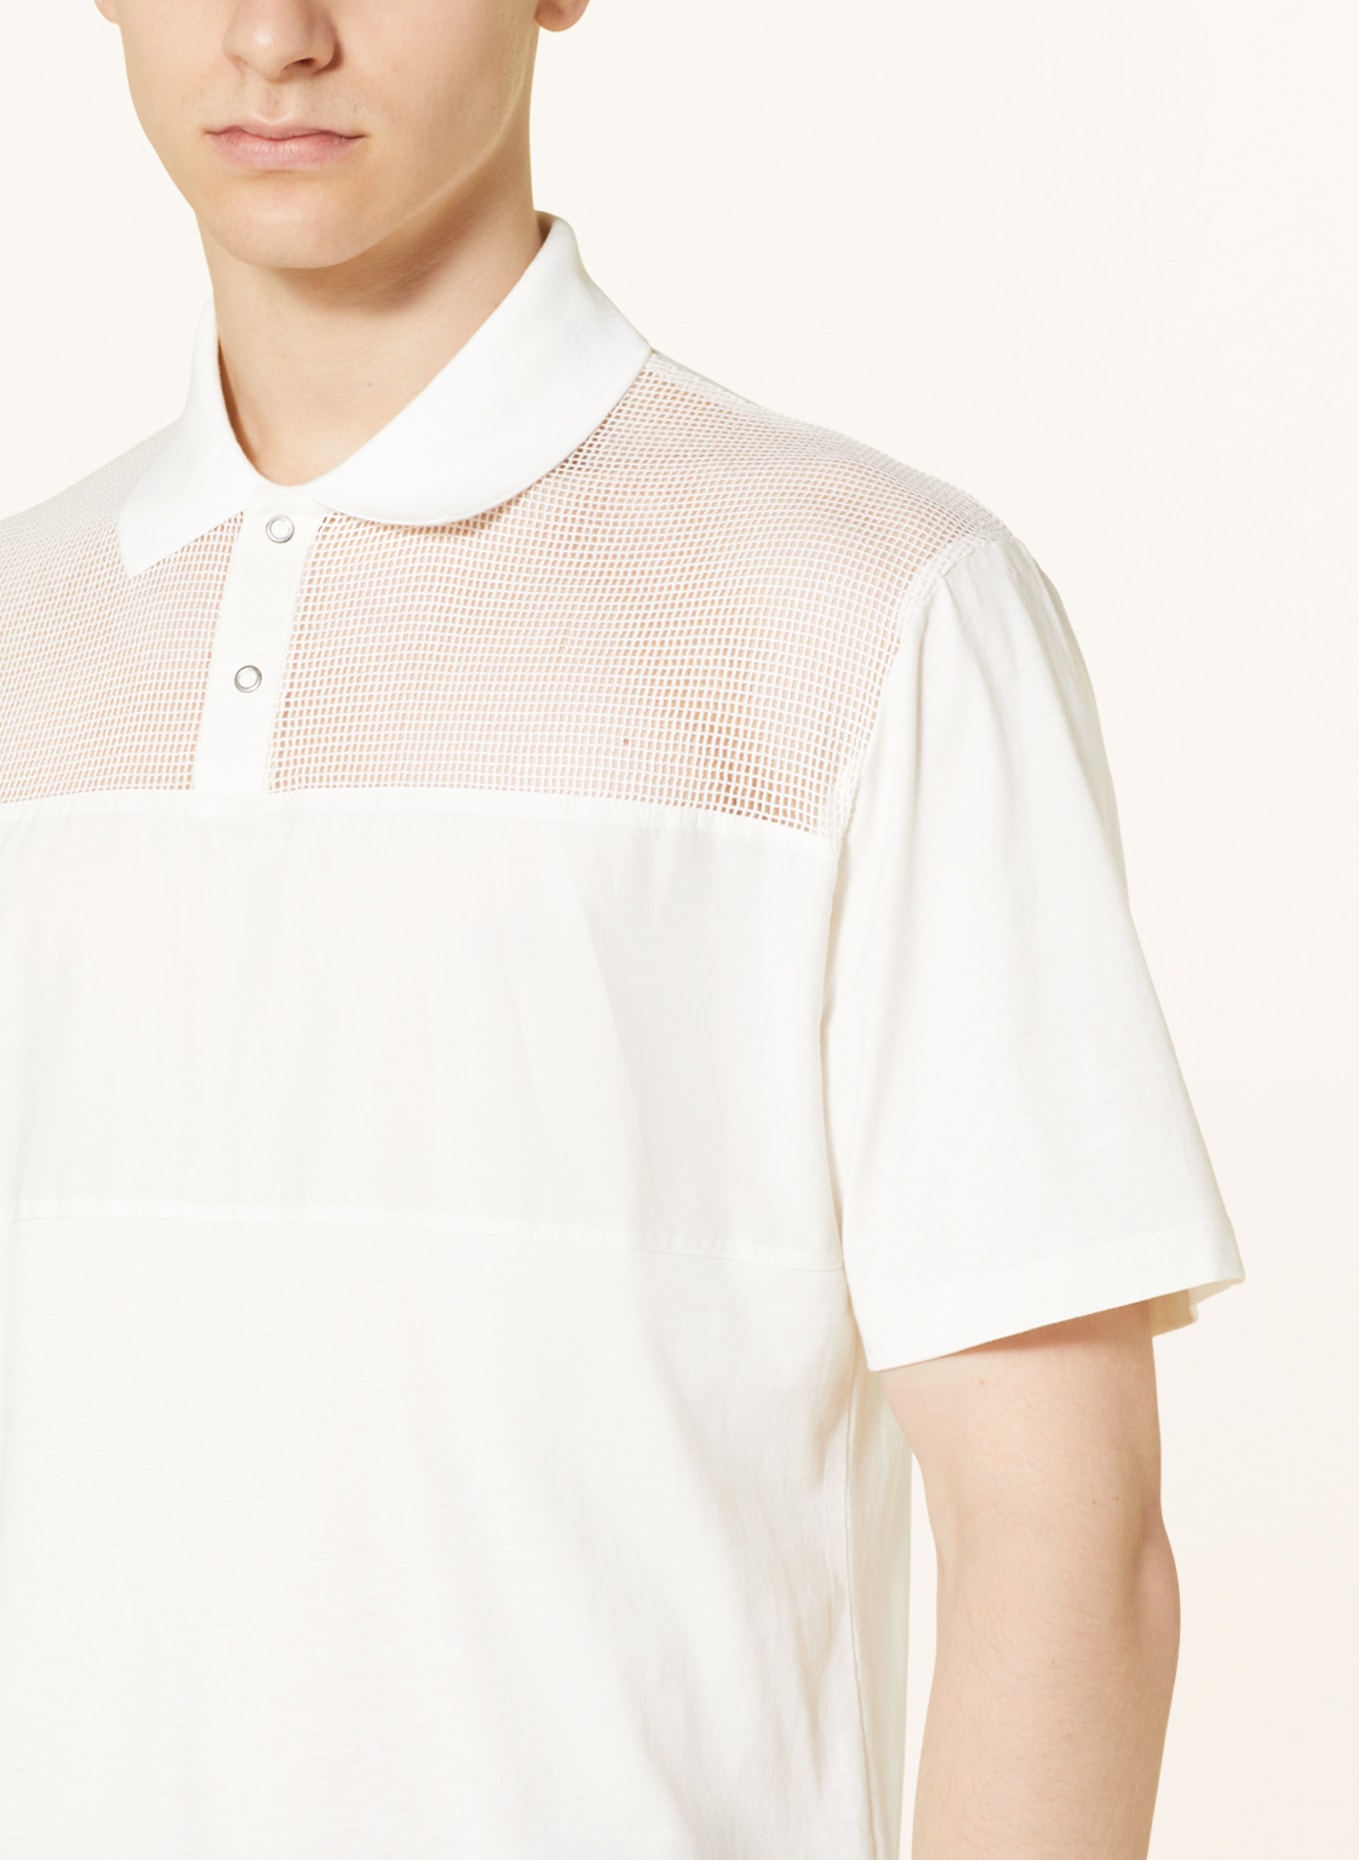 COS Jersey polo shirt relaxed fit, Color: ECRU (Image 4)